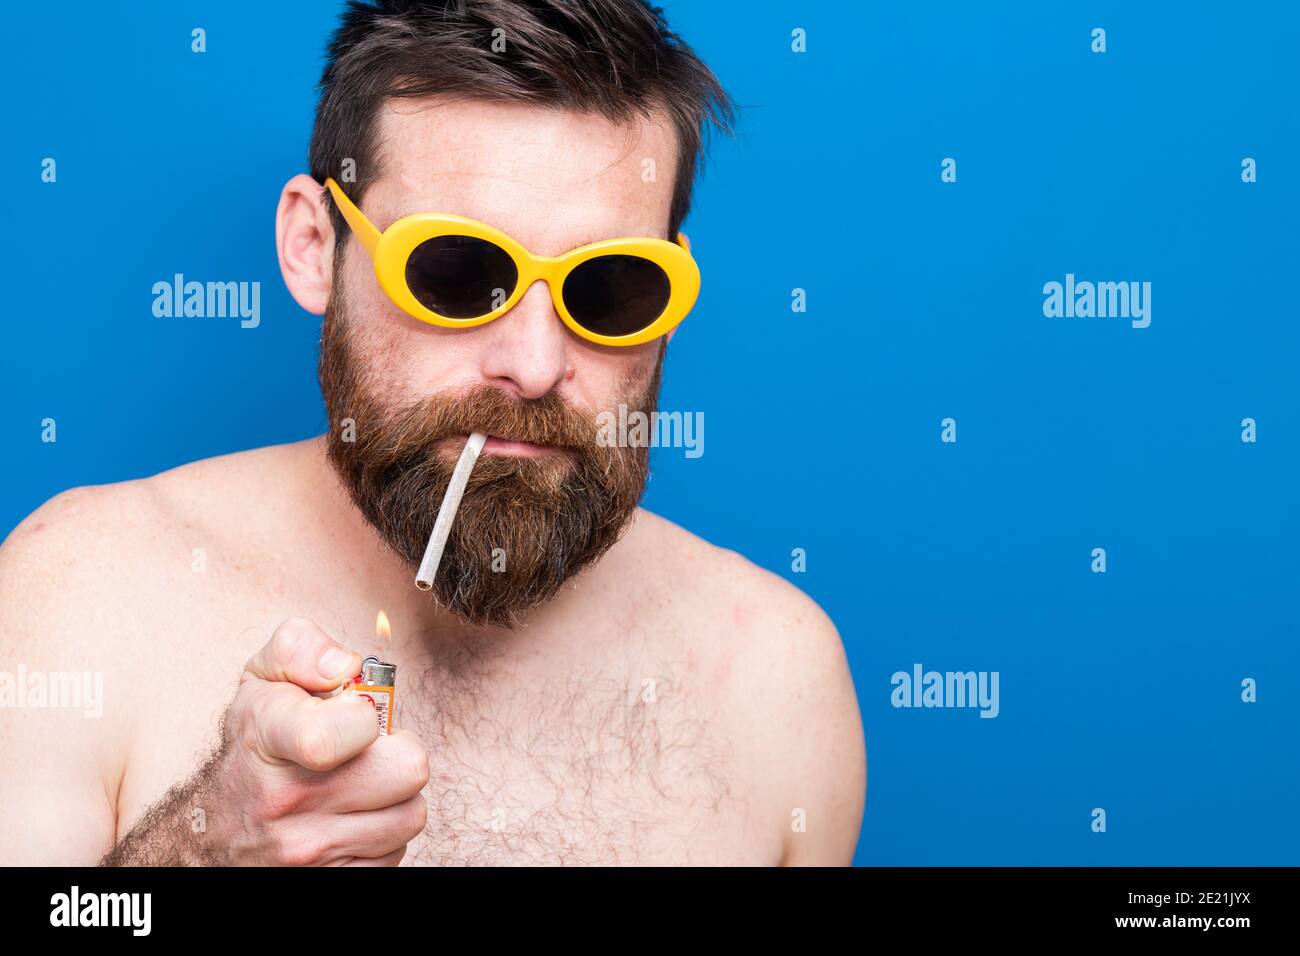 funny young man with sunglasses and cigarette Stock Photo - Alamy